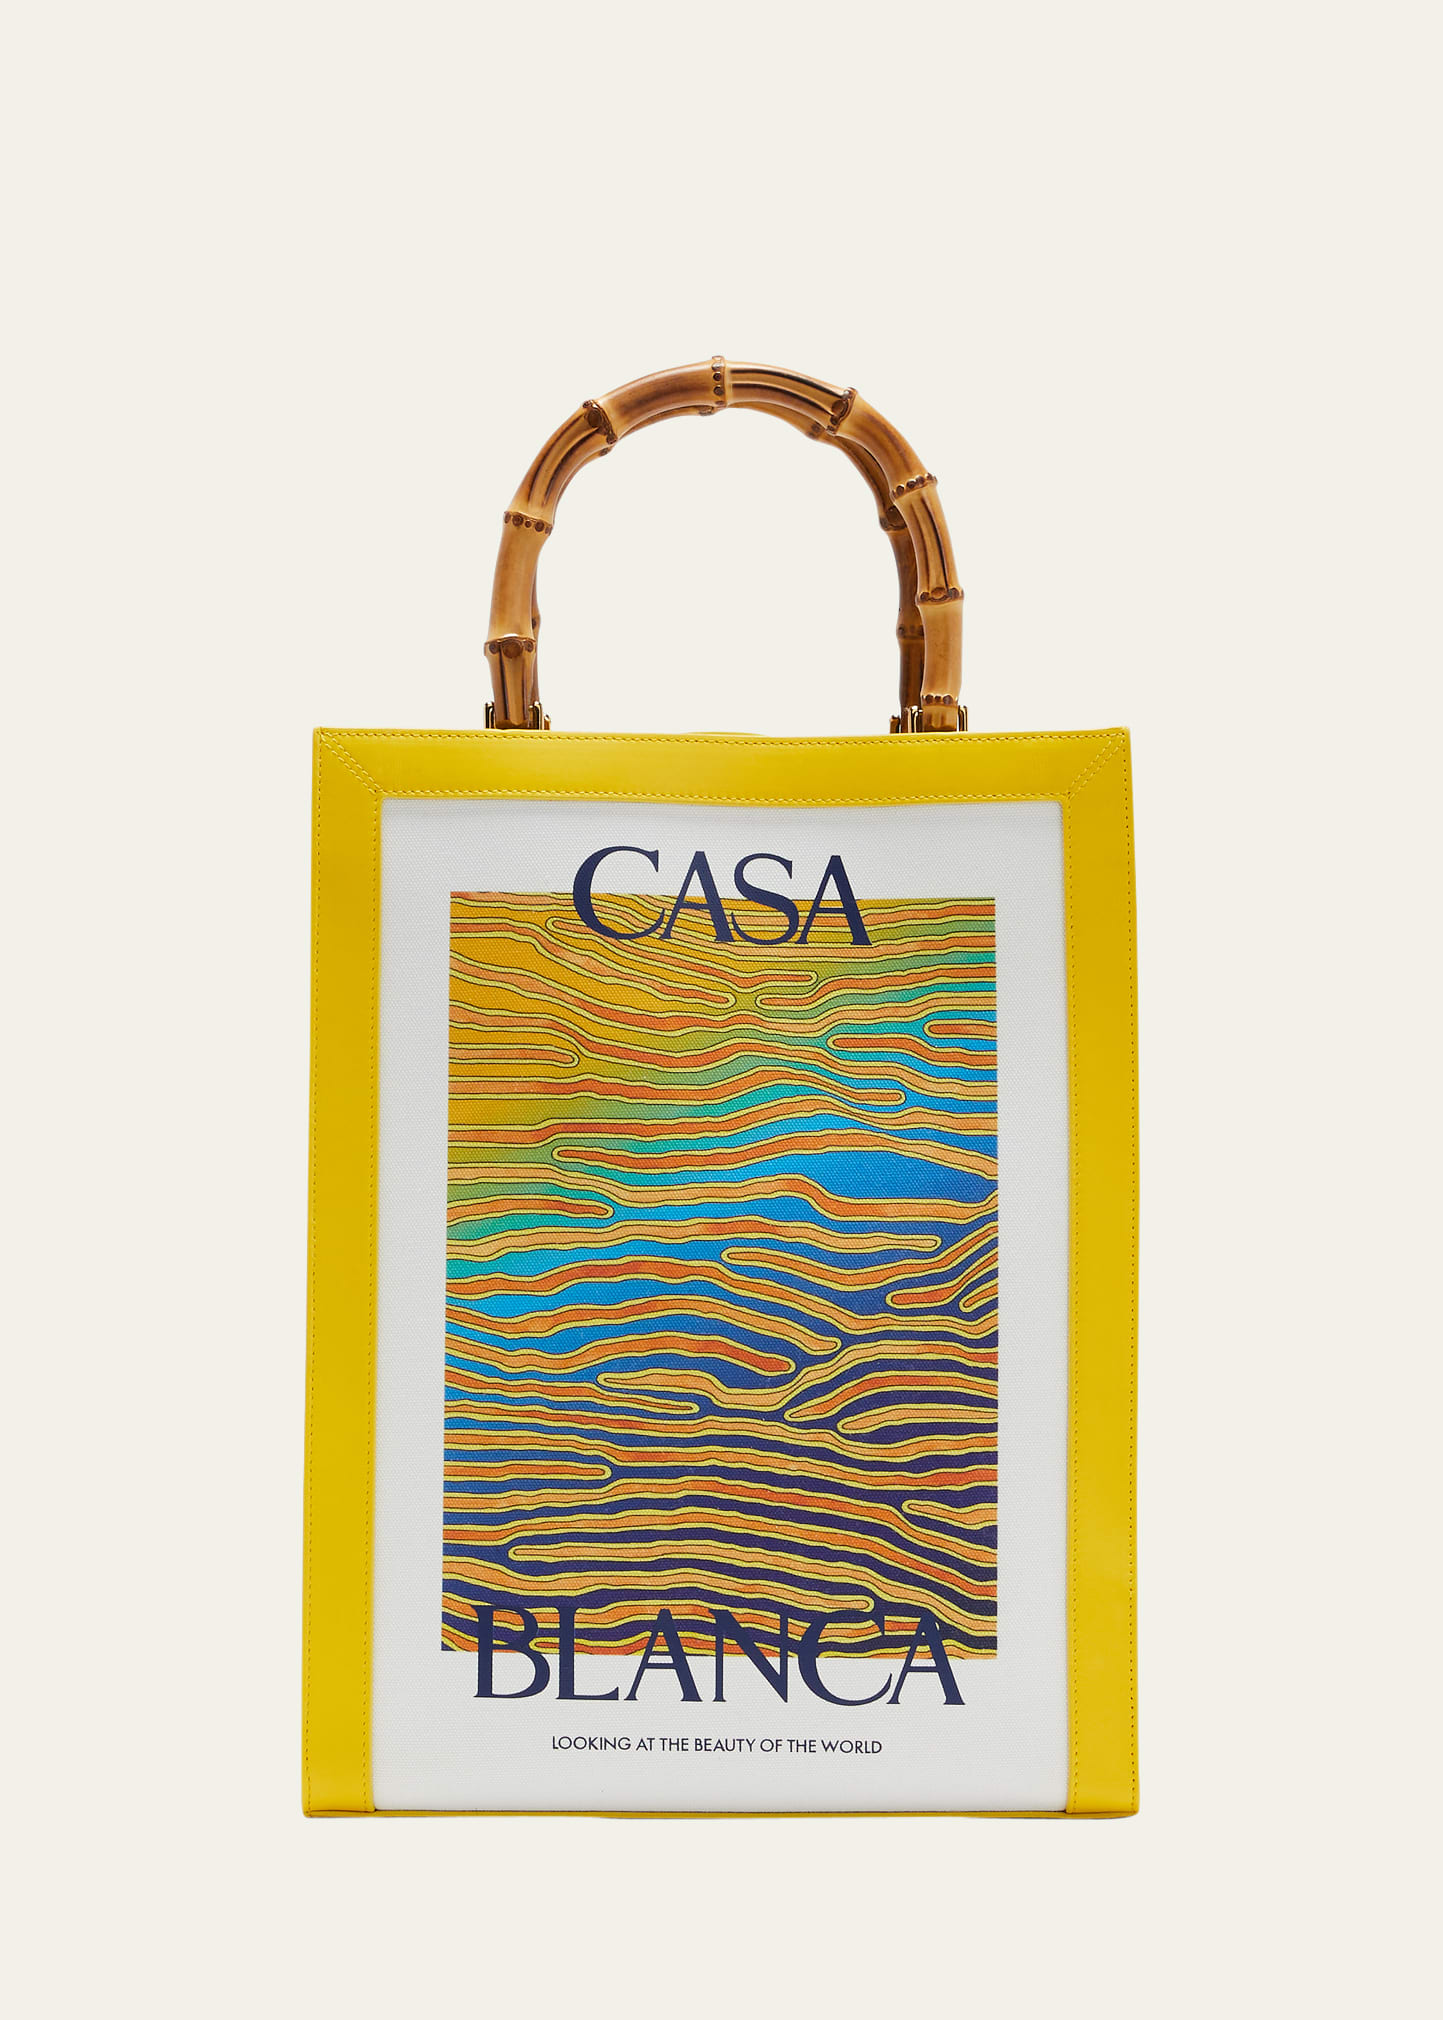 Casablanca Men's Jour Dange Canvas And Leather Tote Bag In Yellow